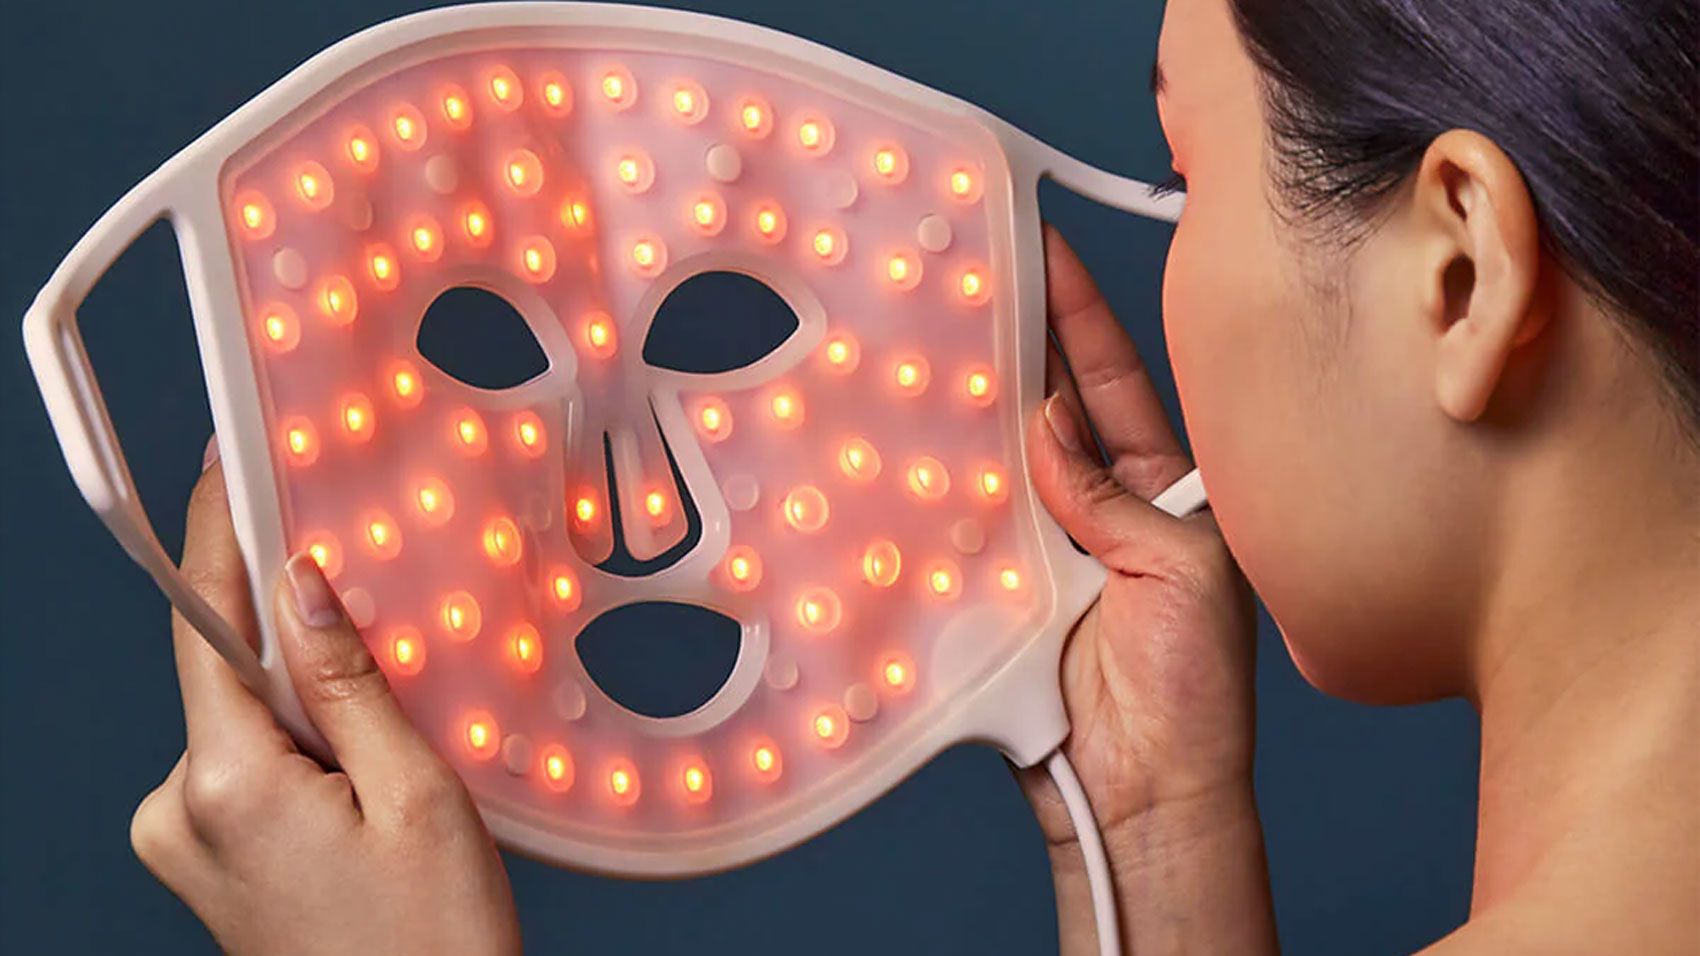 vægt Sommerhus entusiastisk What is red light therapy? Uses, benefits and risks | CNN Underscored